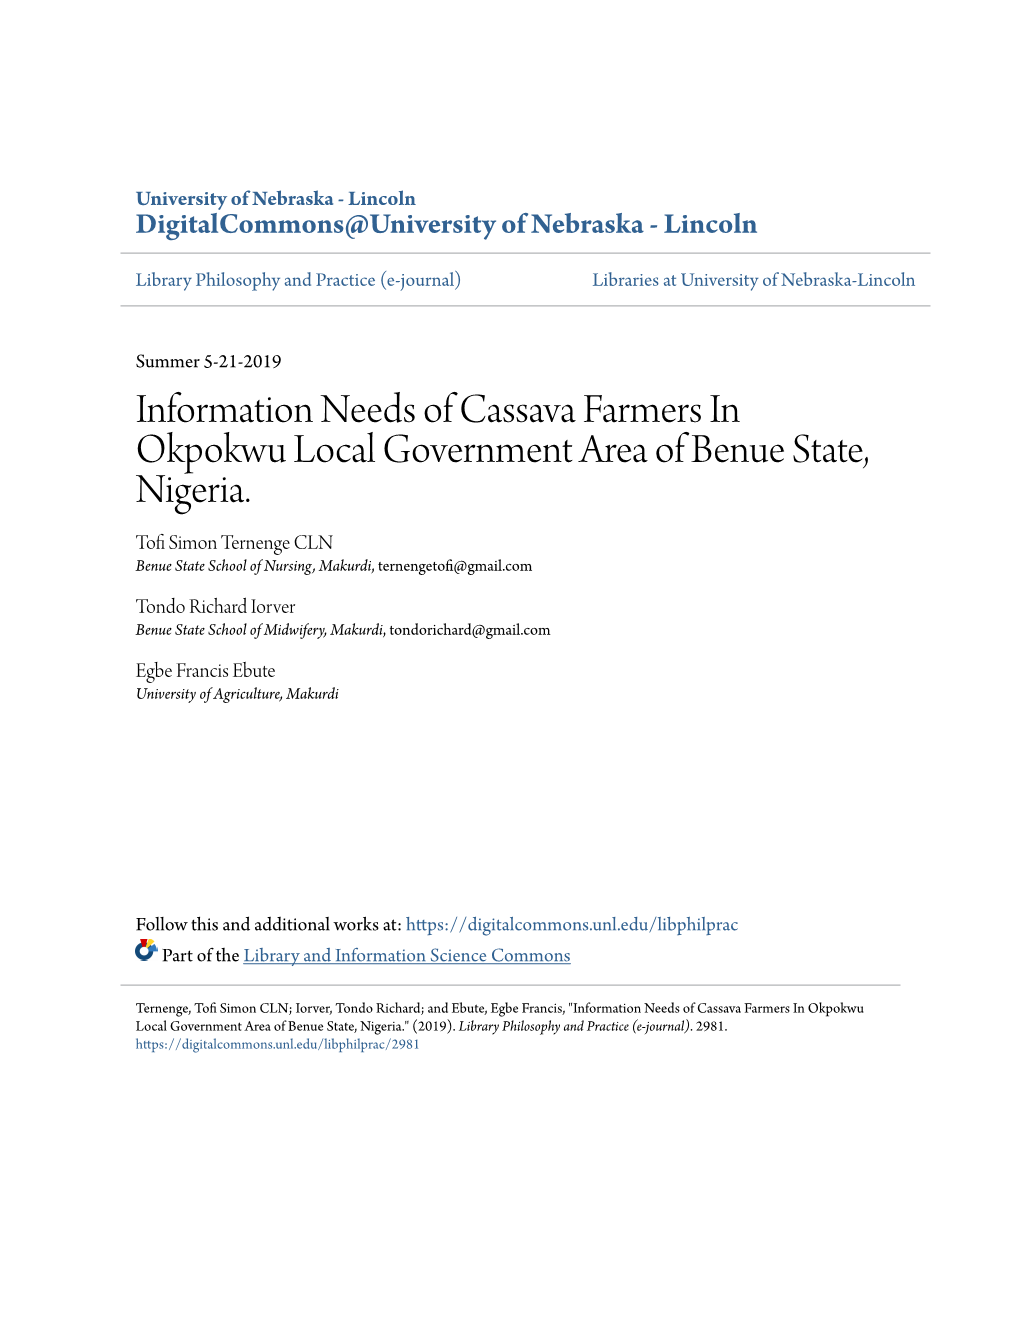 Information Needs of Cassava Farmers in Okpokwu Local Government Area of Benue State, Nigeria